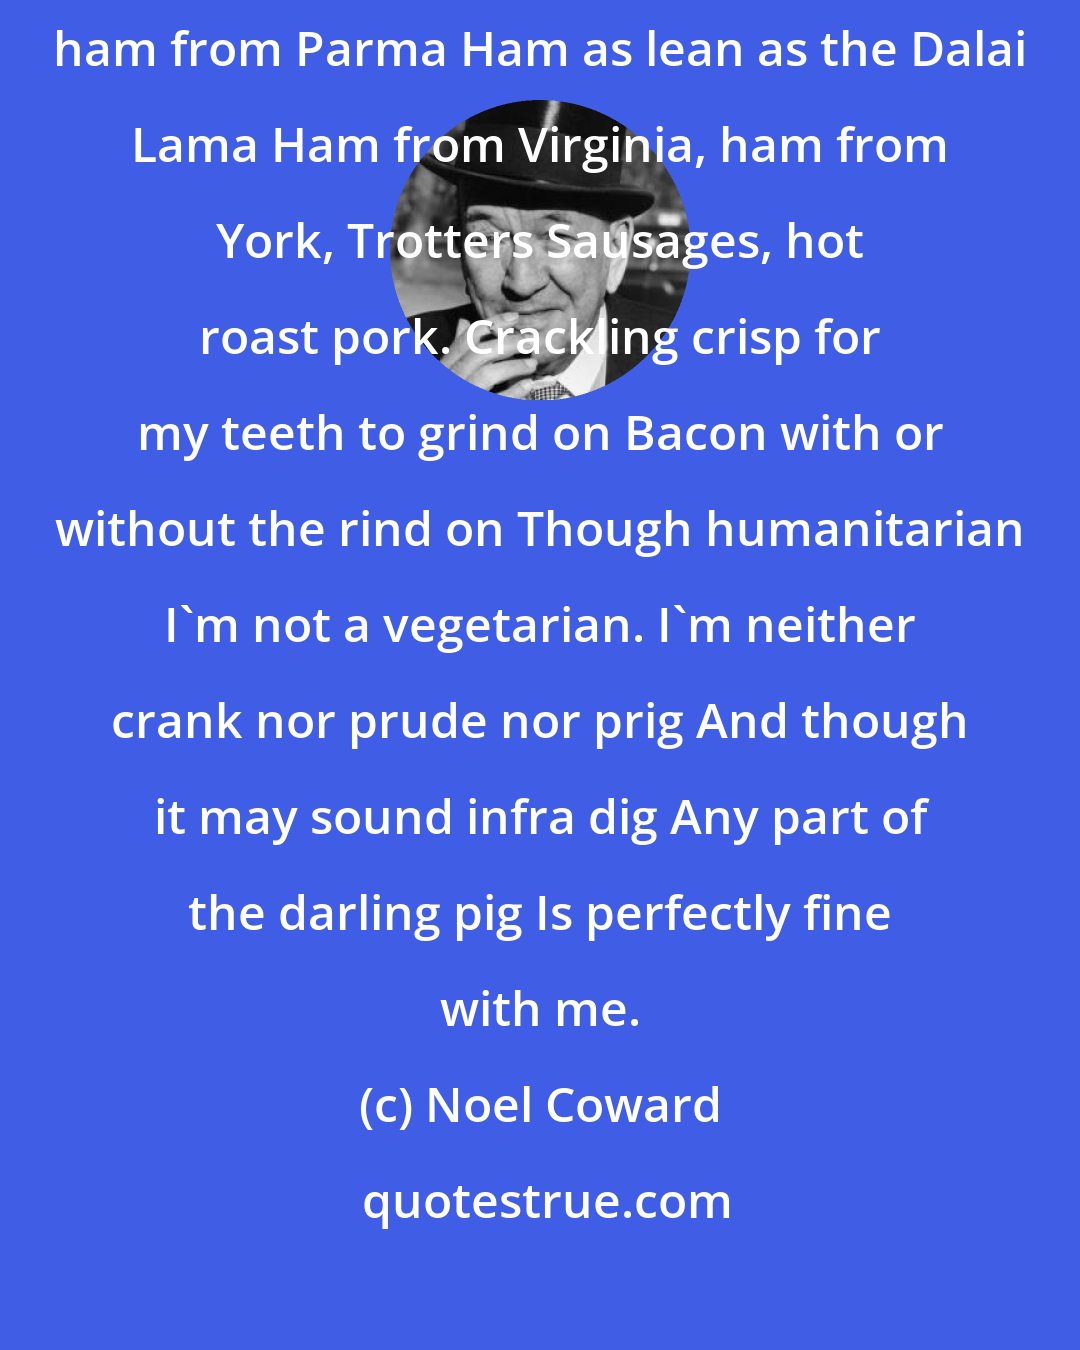 Noel Coward: Any part of the piggy Is quite all right with me Ham from Westphalia, ham from Parma Ham as lean as the Dalai Lama Ham from Virginia, ham from York, Trotters Sausages, hot roast pork. Crackling crisp for my teeth to grind on Bacon with or without the rind on Though humanitarian I'm not a vegetarian. I'm neither crank nor prude nor prig And though it may sound infra dig Any part of the darling pig Is perfectly fine with me.